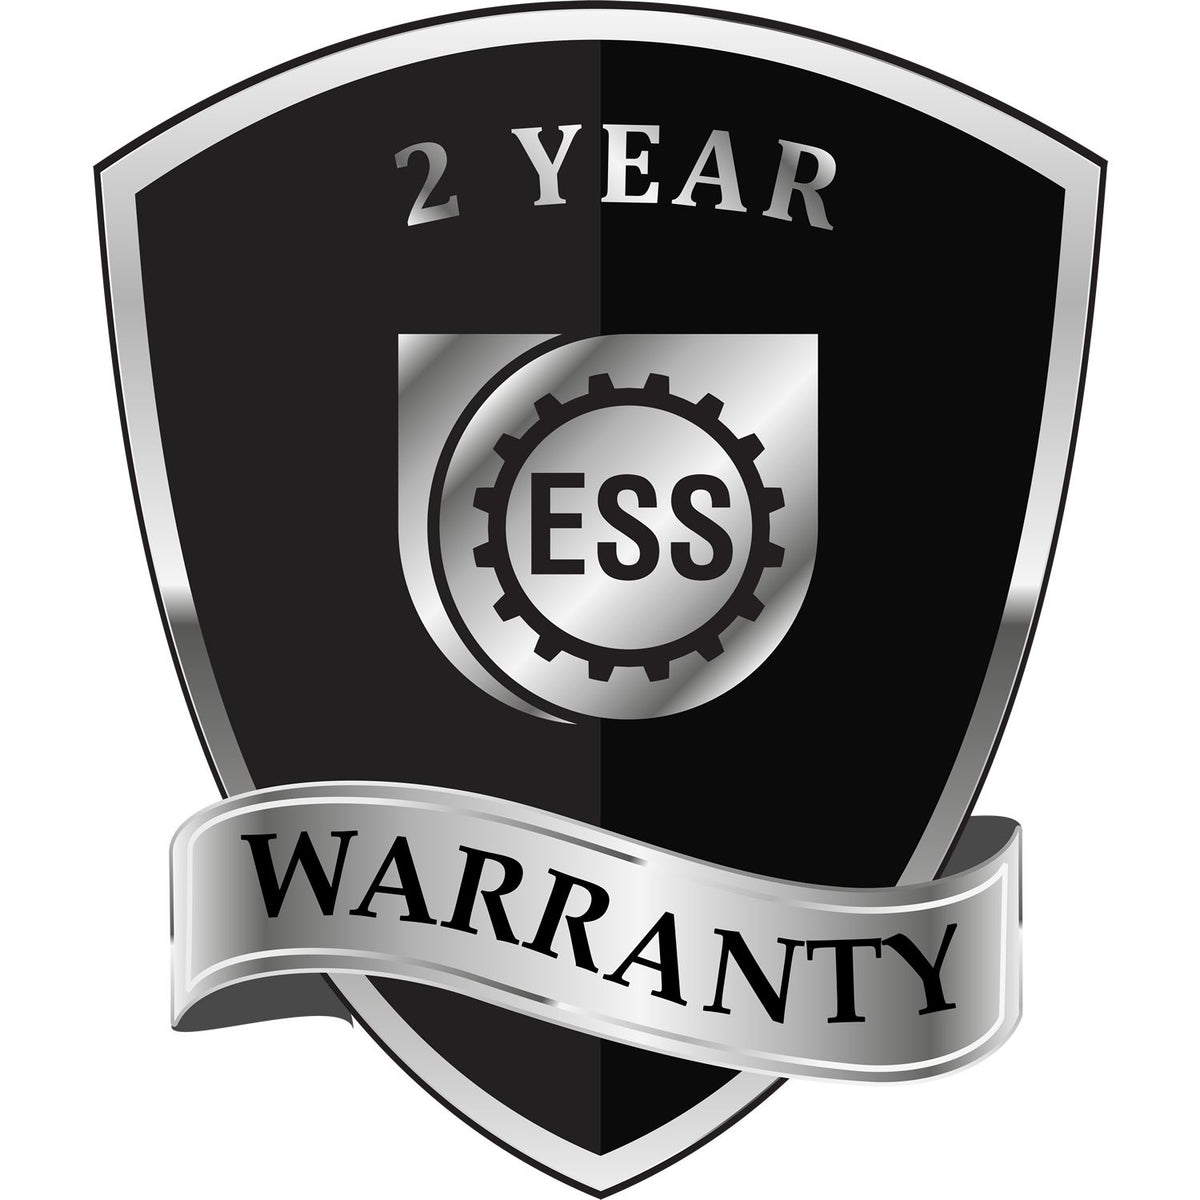 A badge or emblem showing a warranty icon for the Heavy Duty Cast Iron Virginia Architect Embosser